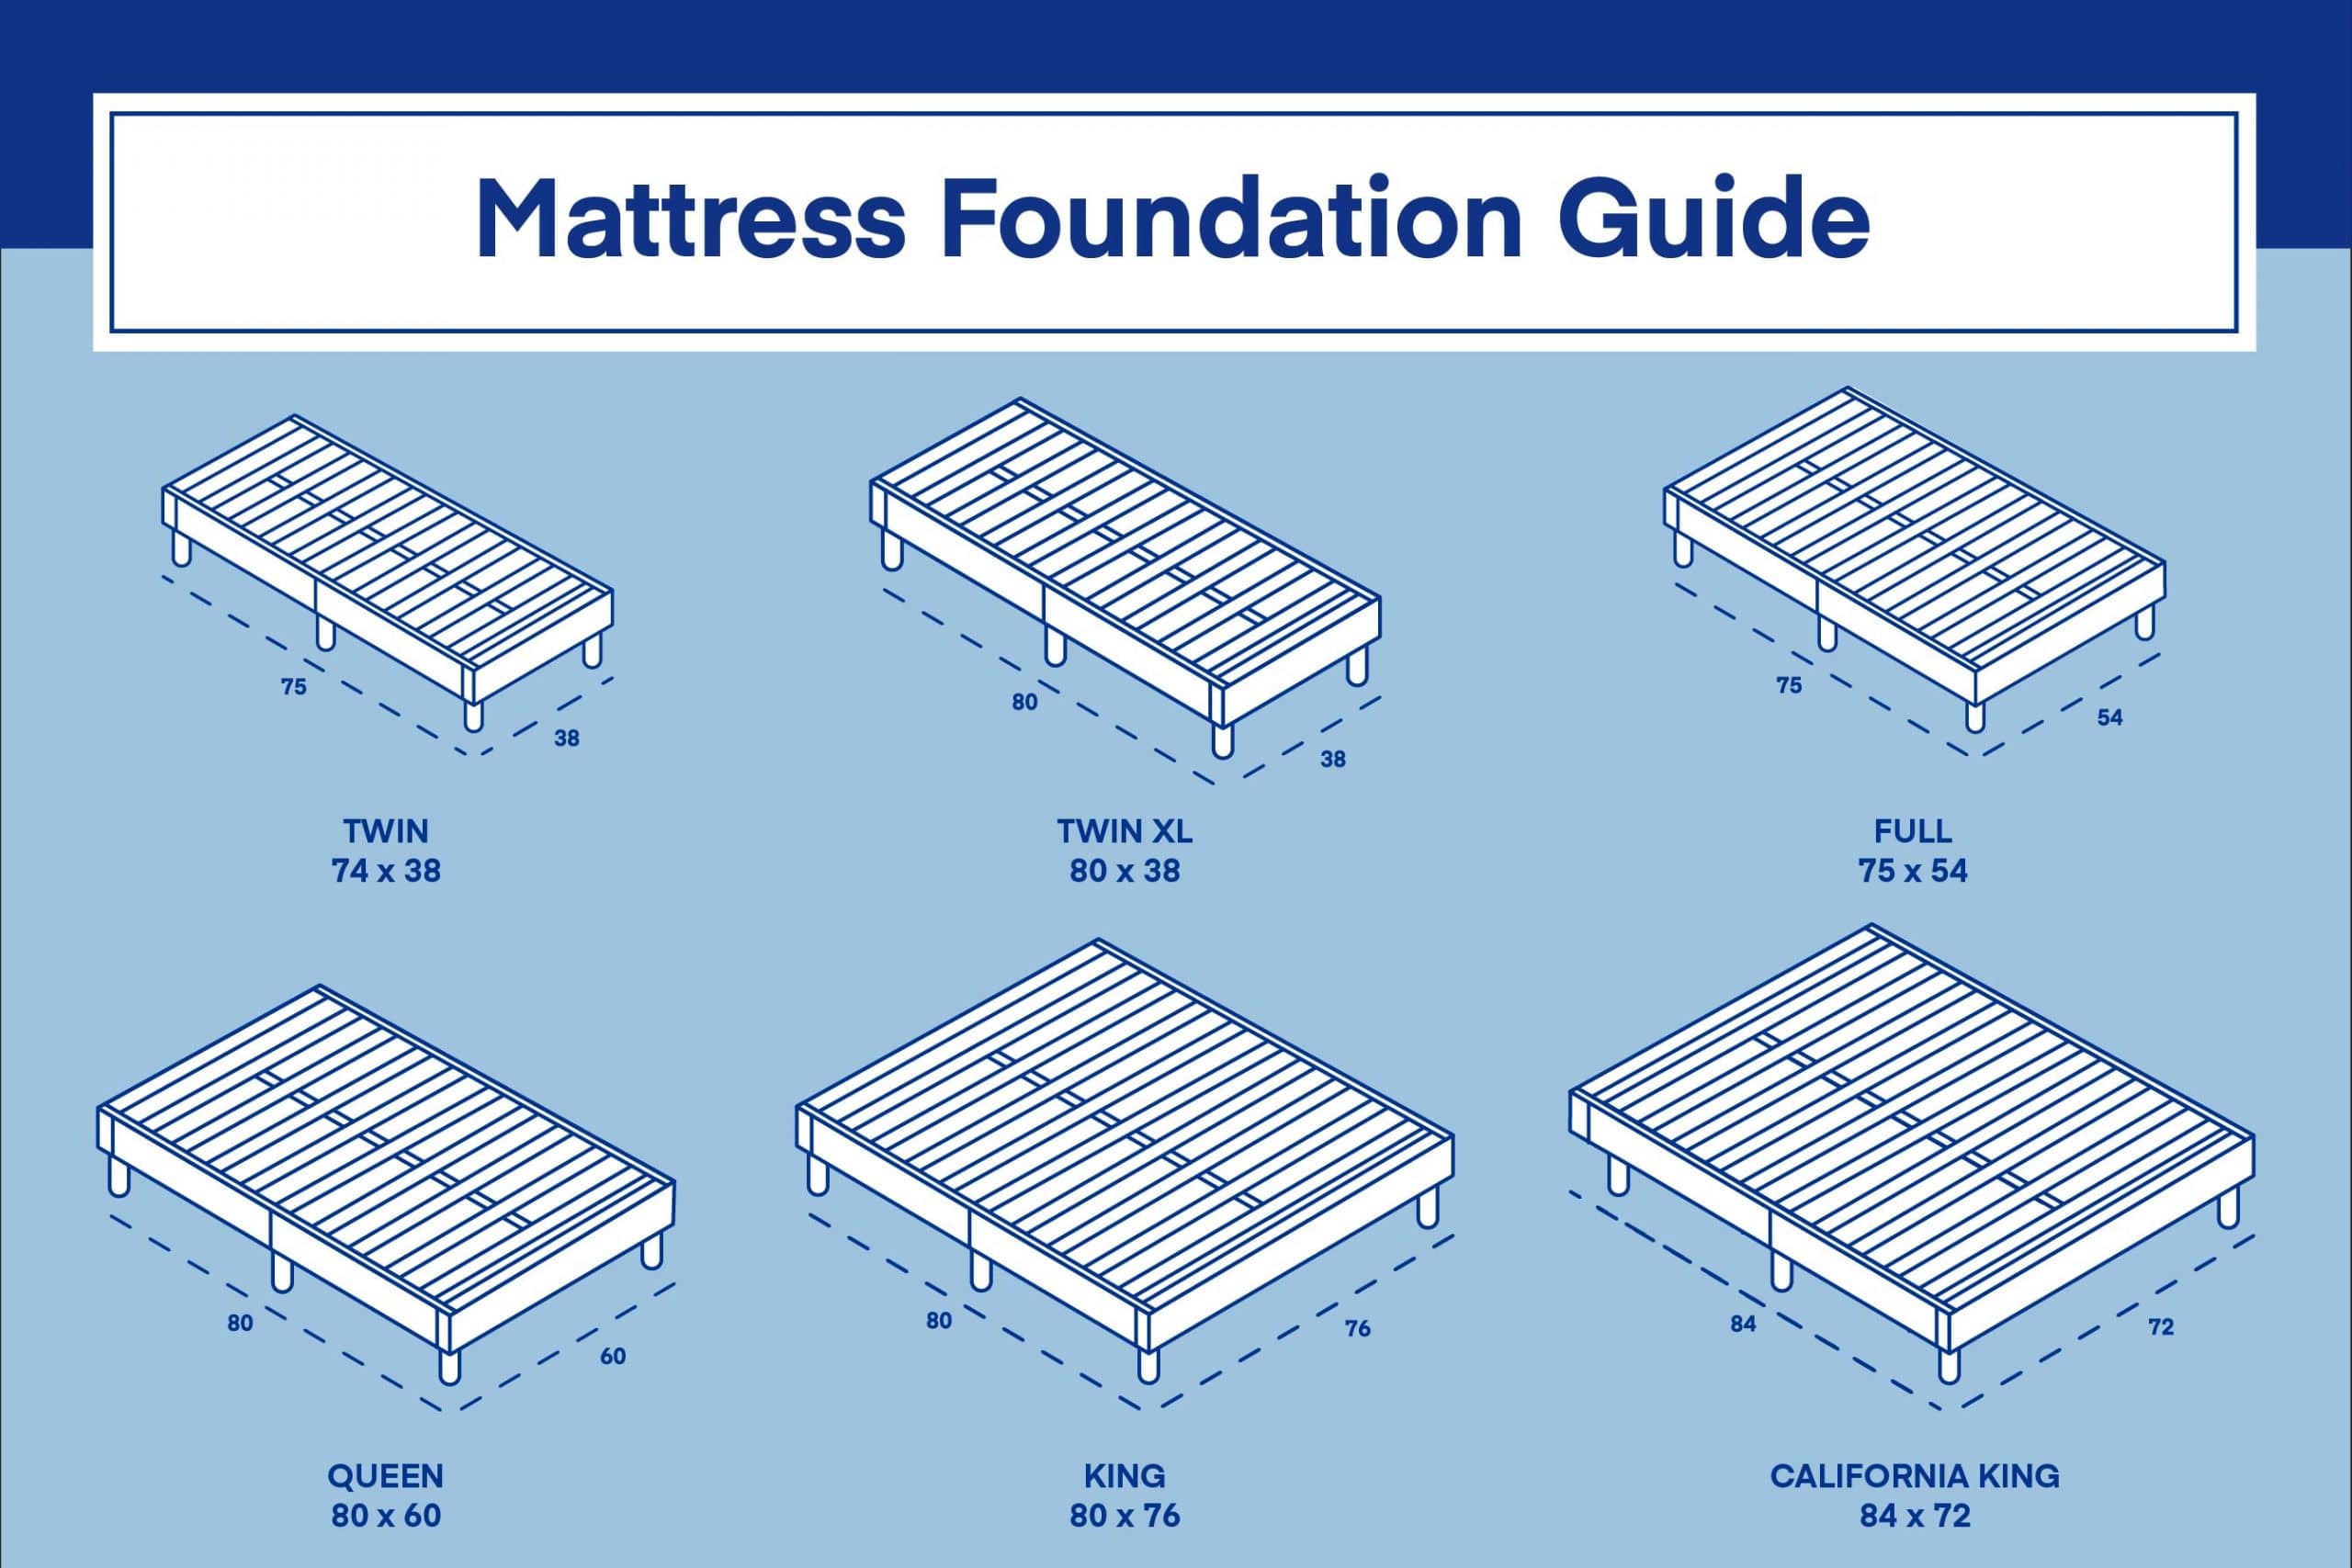 What Is A Standard Profile Mattress?